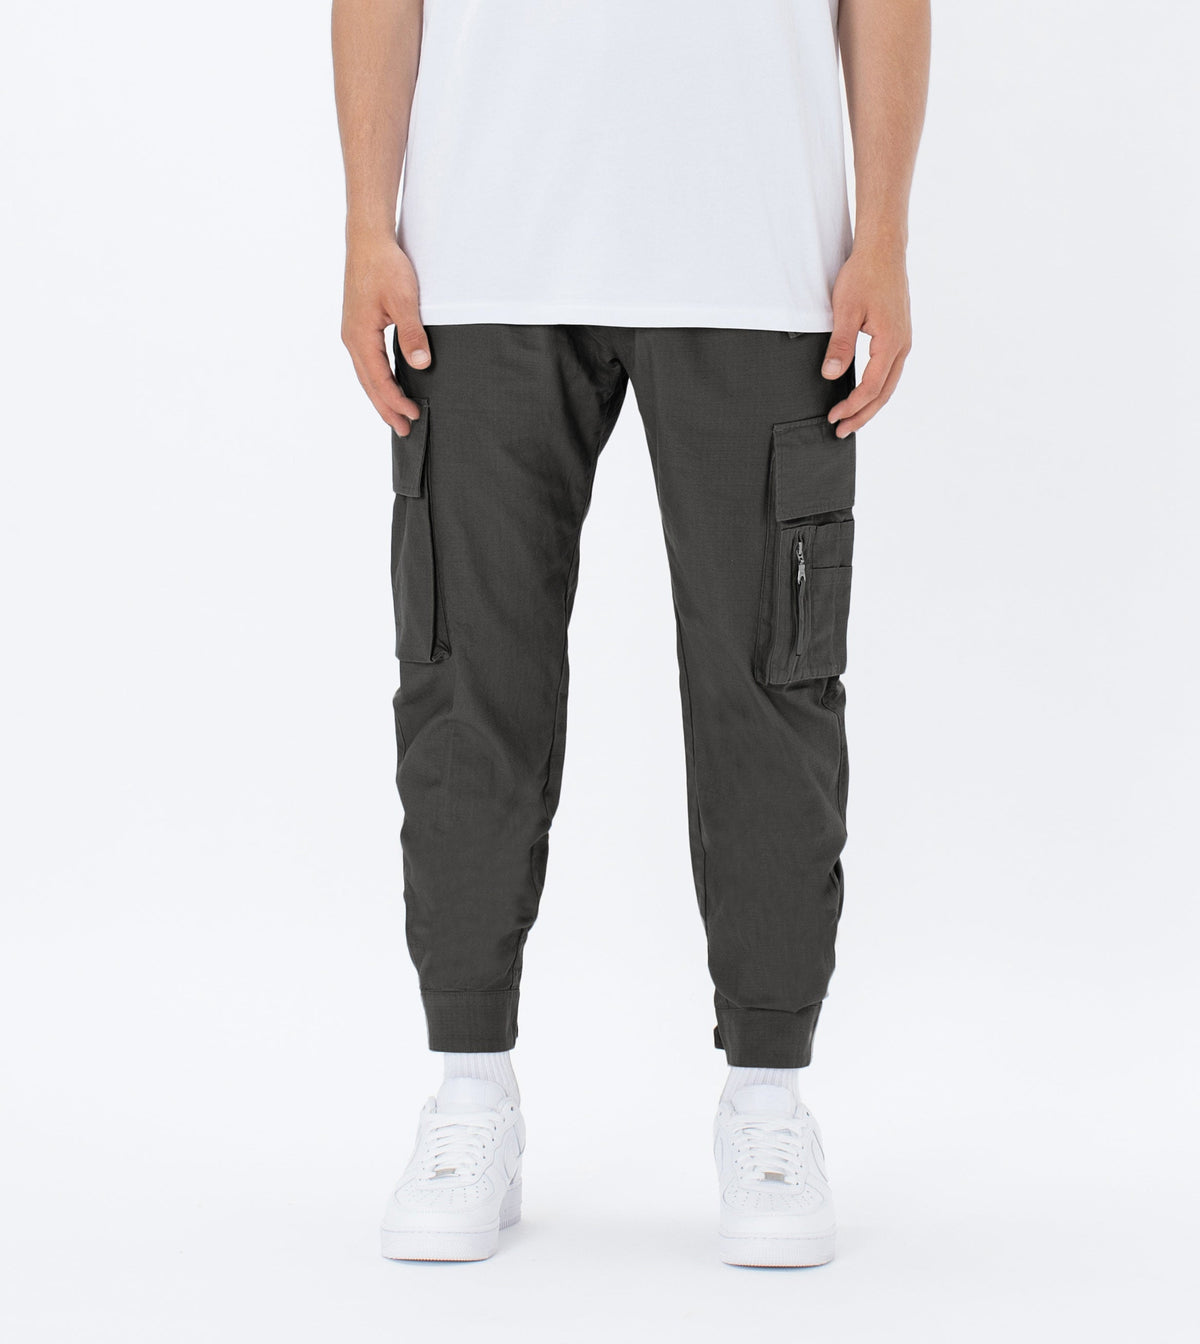 Take a look at our exciting line of Militat Jumpa Pant Ripstop Dk Army  ZANEROBE . Unique Designs You Won't find anywhere else